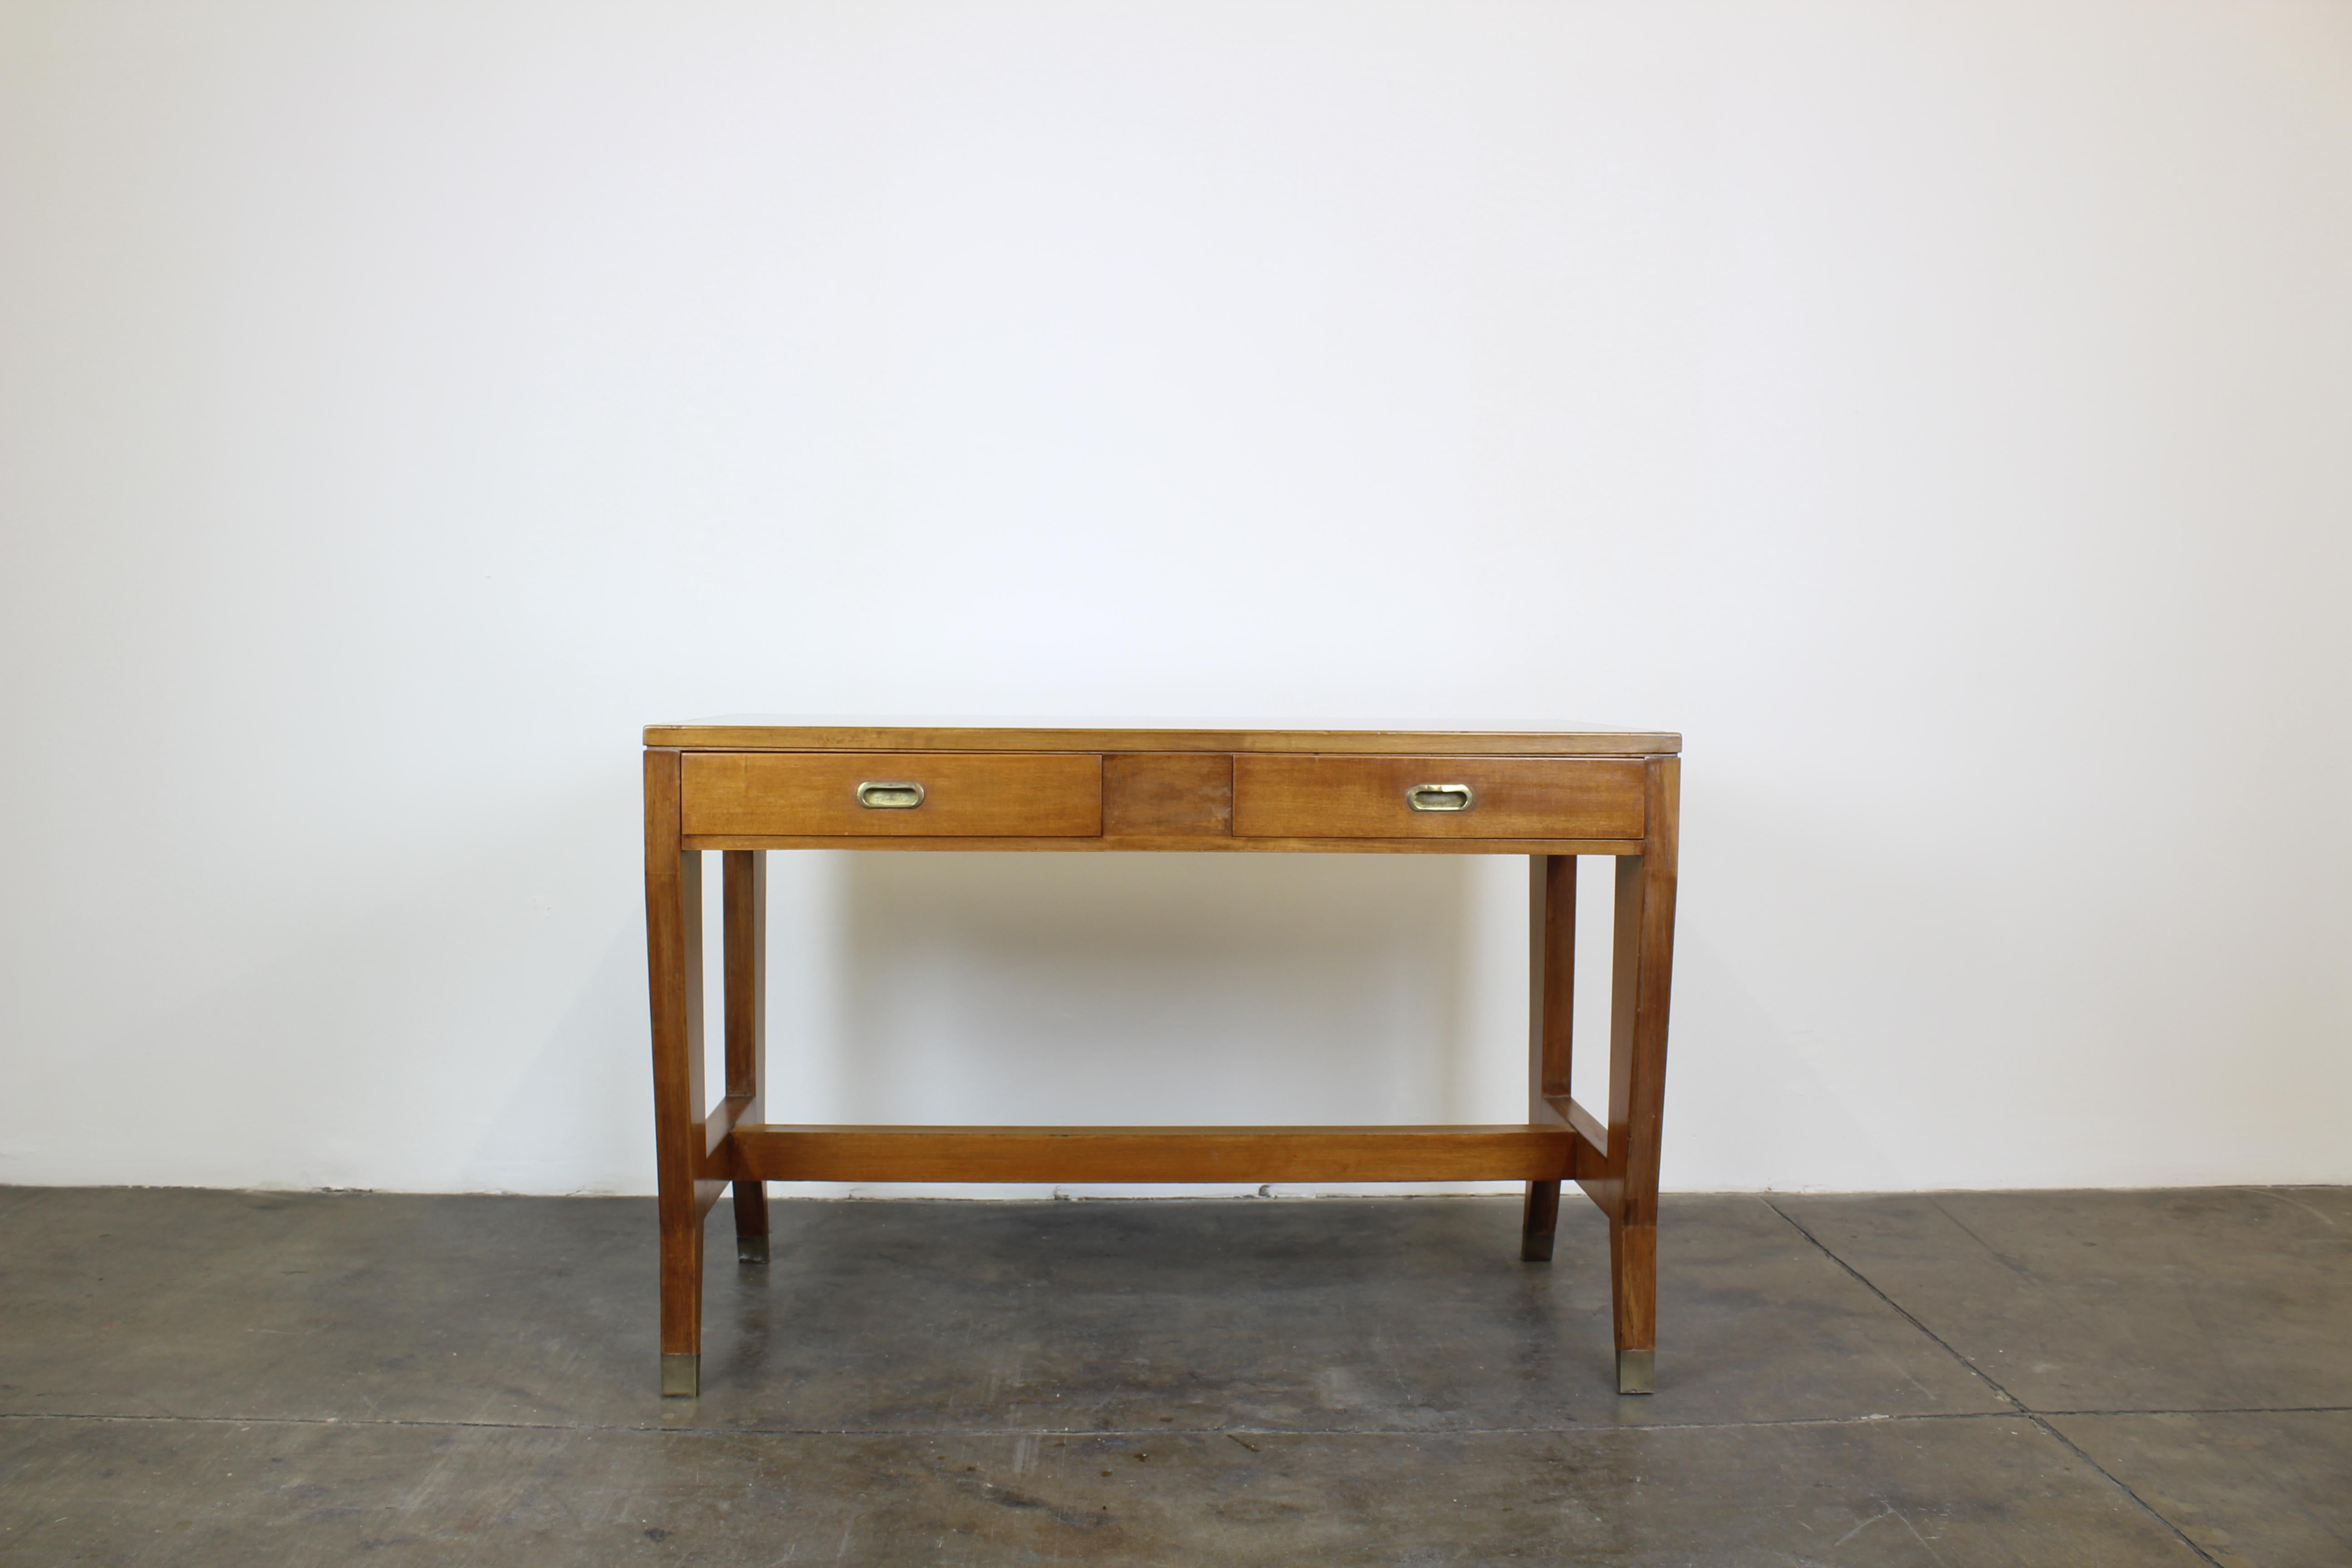 Desk with two frontal drawers by Gio Ponti.
Walnut wood, formica top, brass details (handles and feet).
Designed for the offices of BNL (Banca Nazionale del Lavoro) and manufactured by the Italian Company Schirolli in the mid-1950s.

Measures: